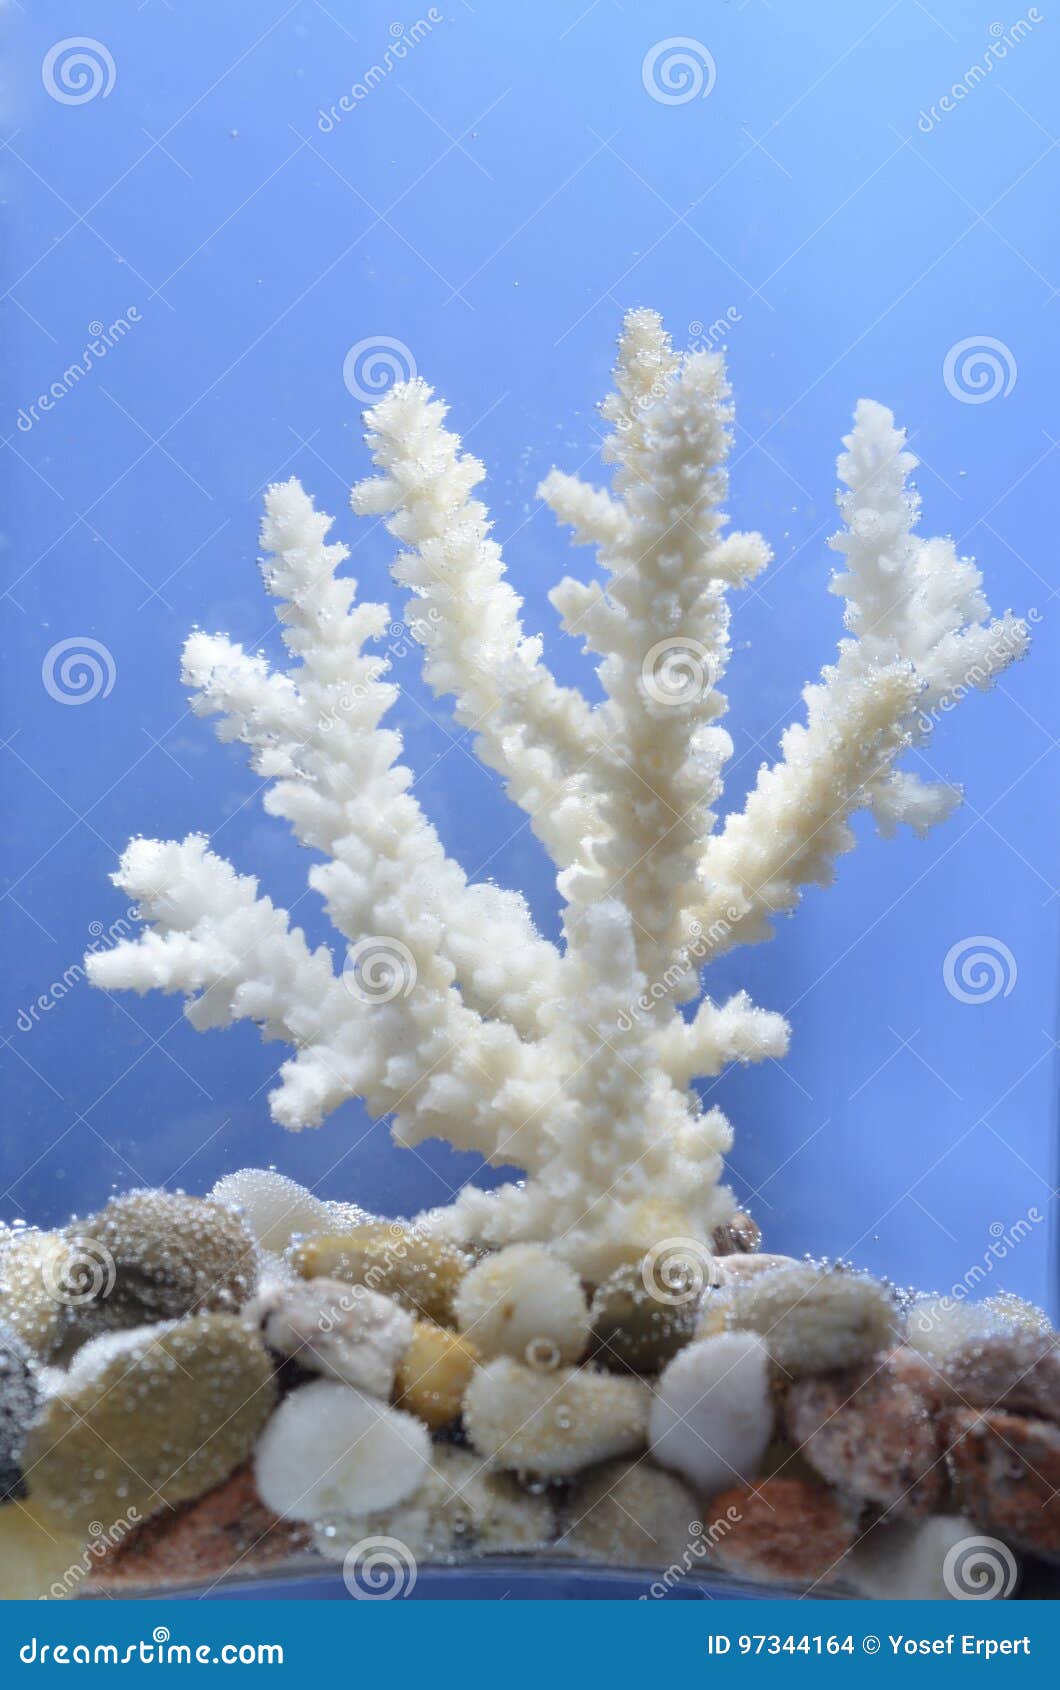 Branch of white coral stock photo. Image of background - 97344164